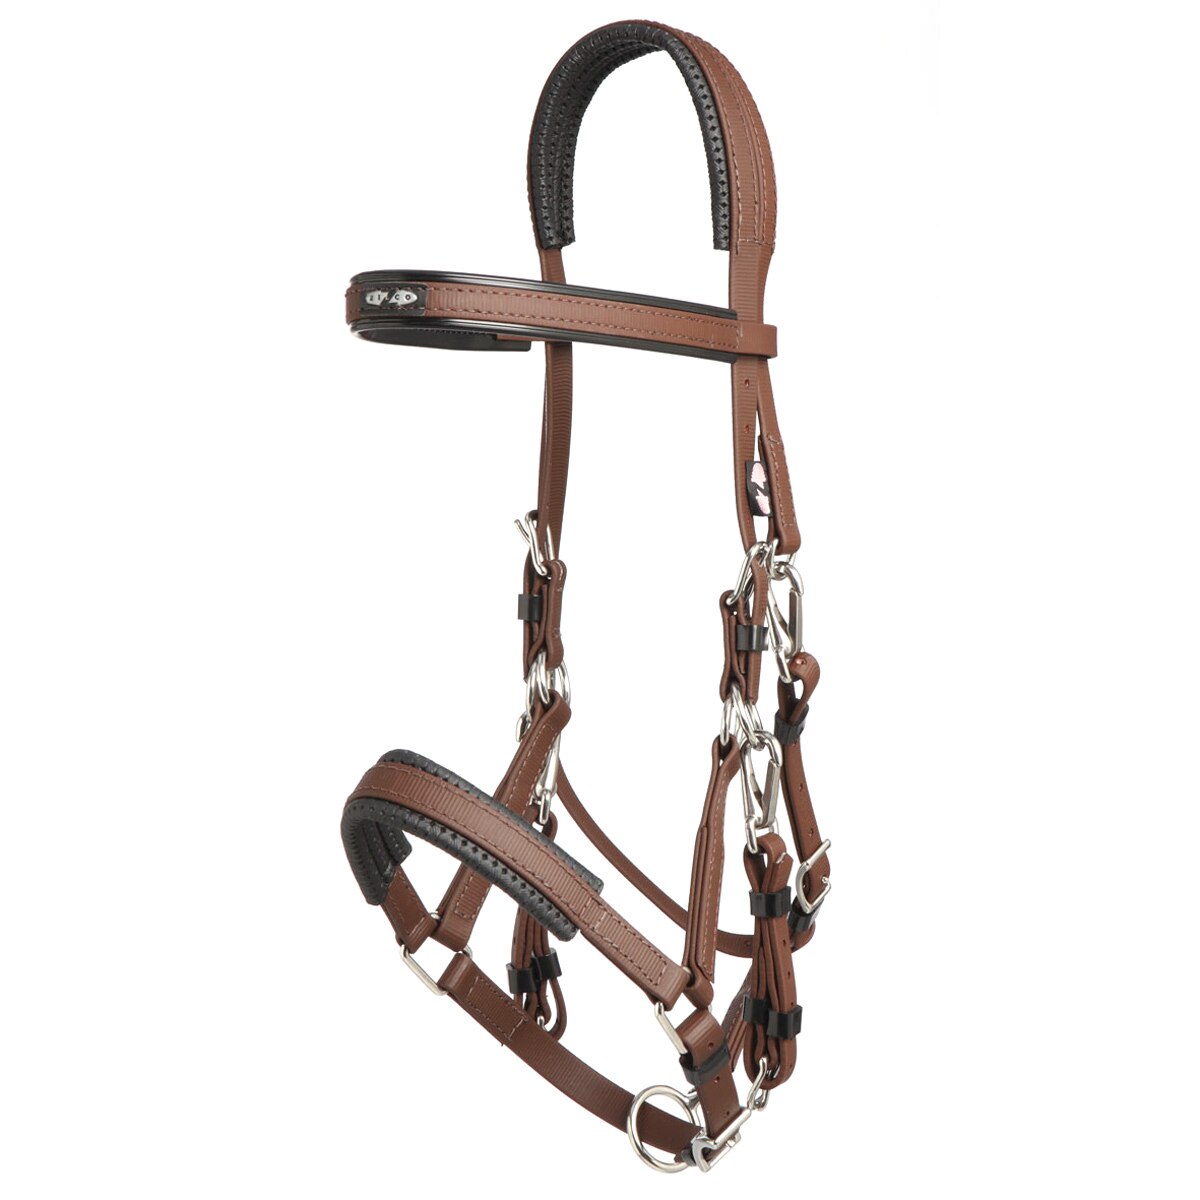 Bridle ZILCO Deluxe Endurance Set Reins and Breastplate Size Arab